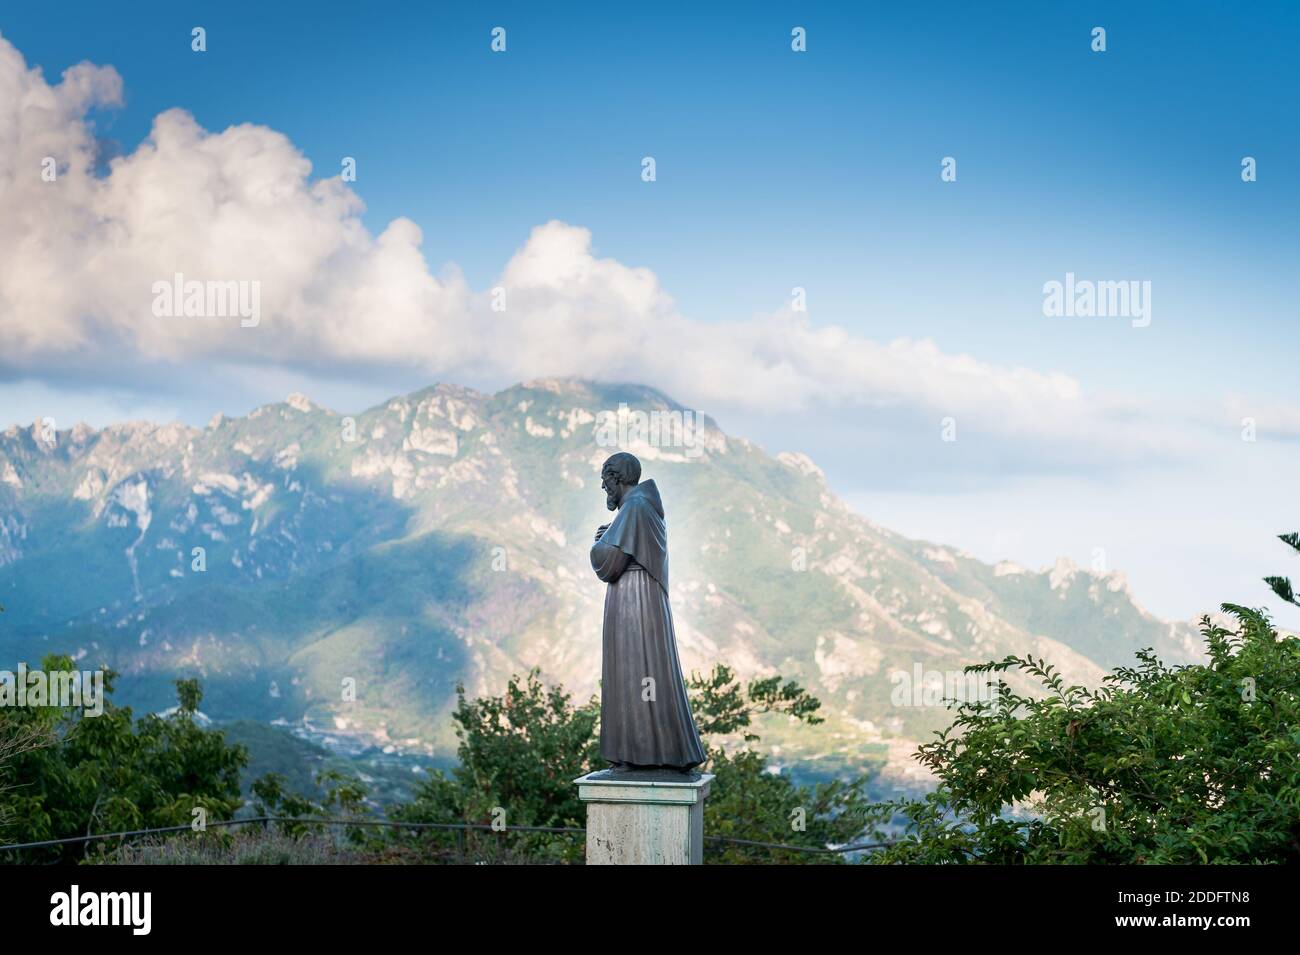 The view across the valley taken from the beautiful town of Ravello on the Amalfi Coast, Italy. The Paolino Vassallo Memorial statue looks on. Stock Photo